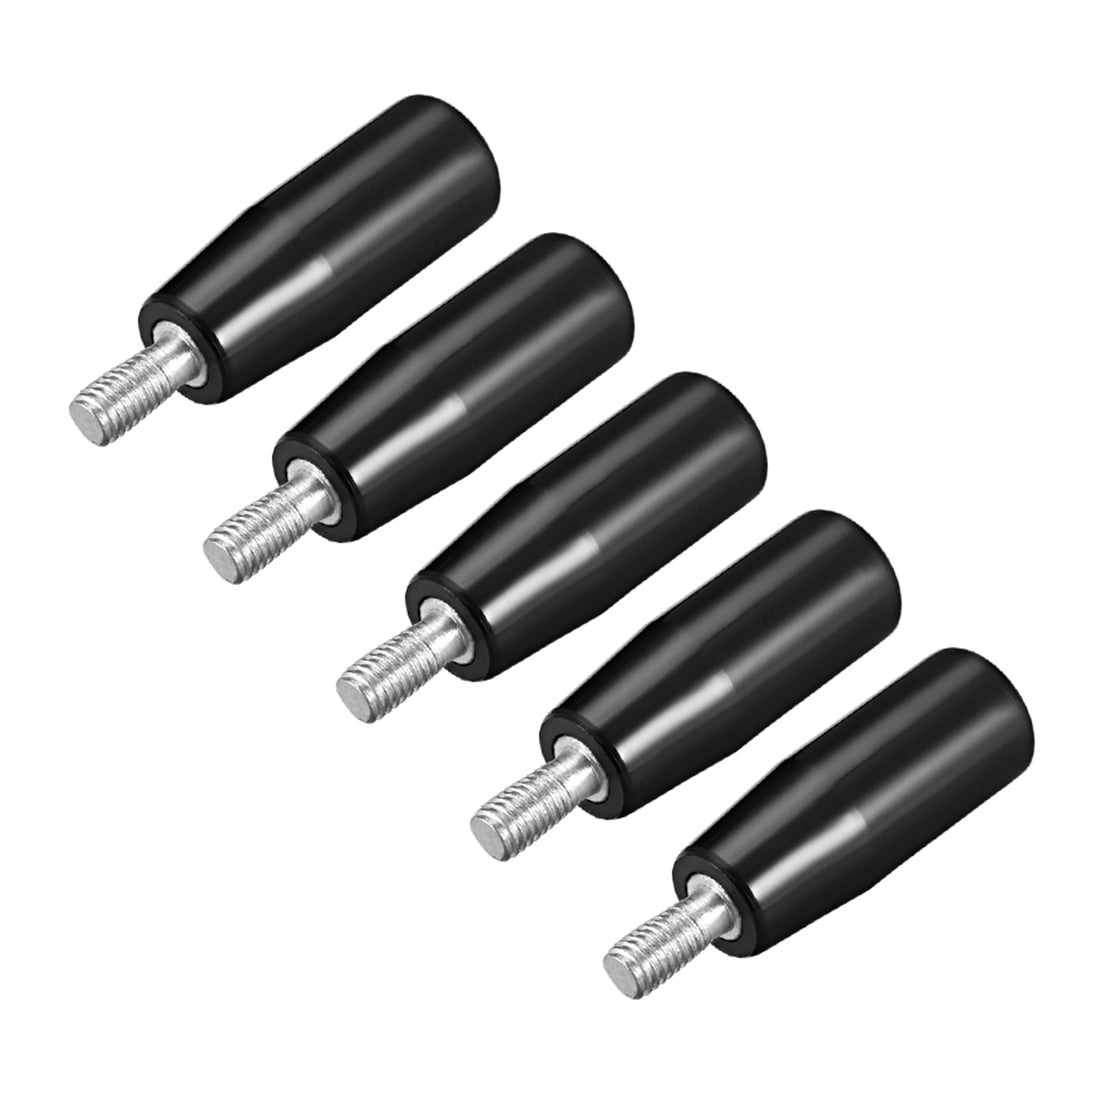 uxcell Uxcell 5 Pcs Revolving Handwheel Machine Handle M8x50 Male Threaded Stem 2-inch Length for Milling Machine